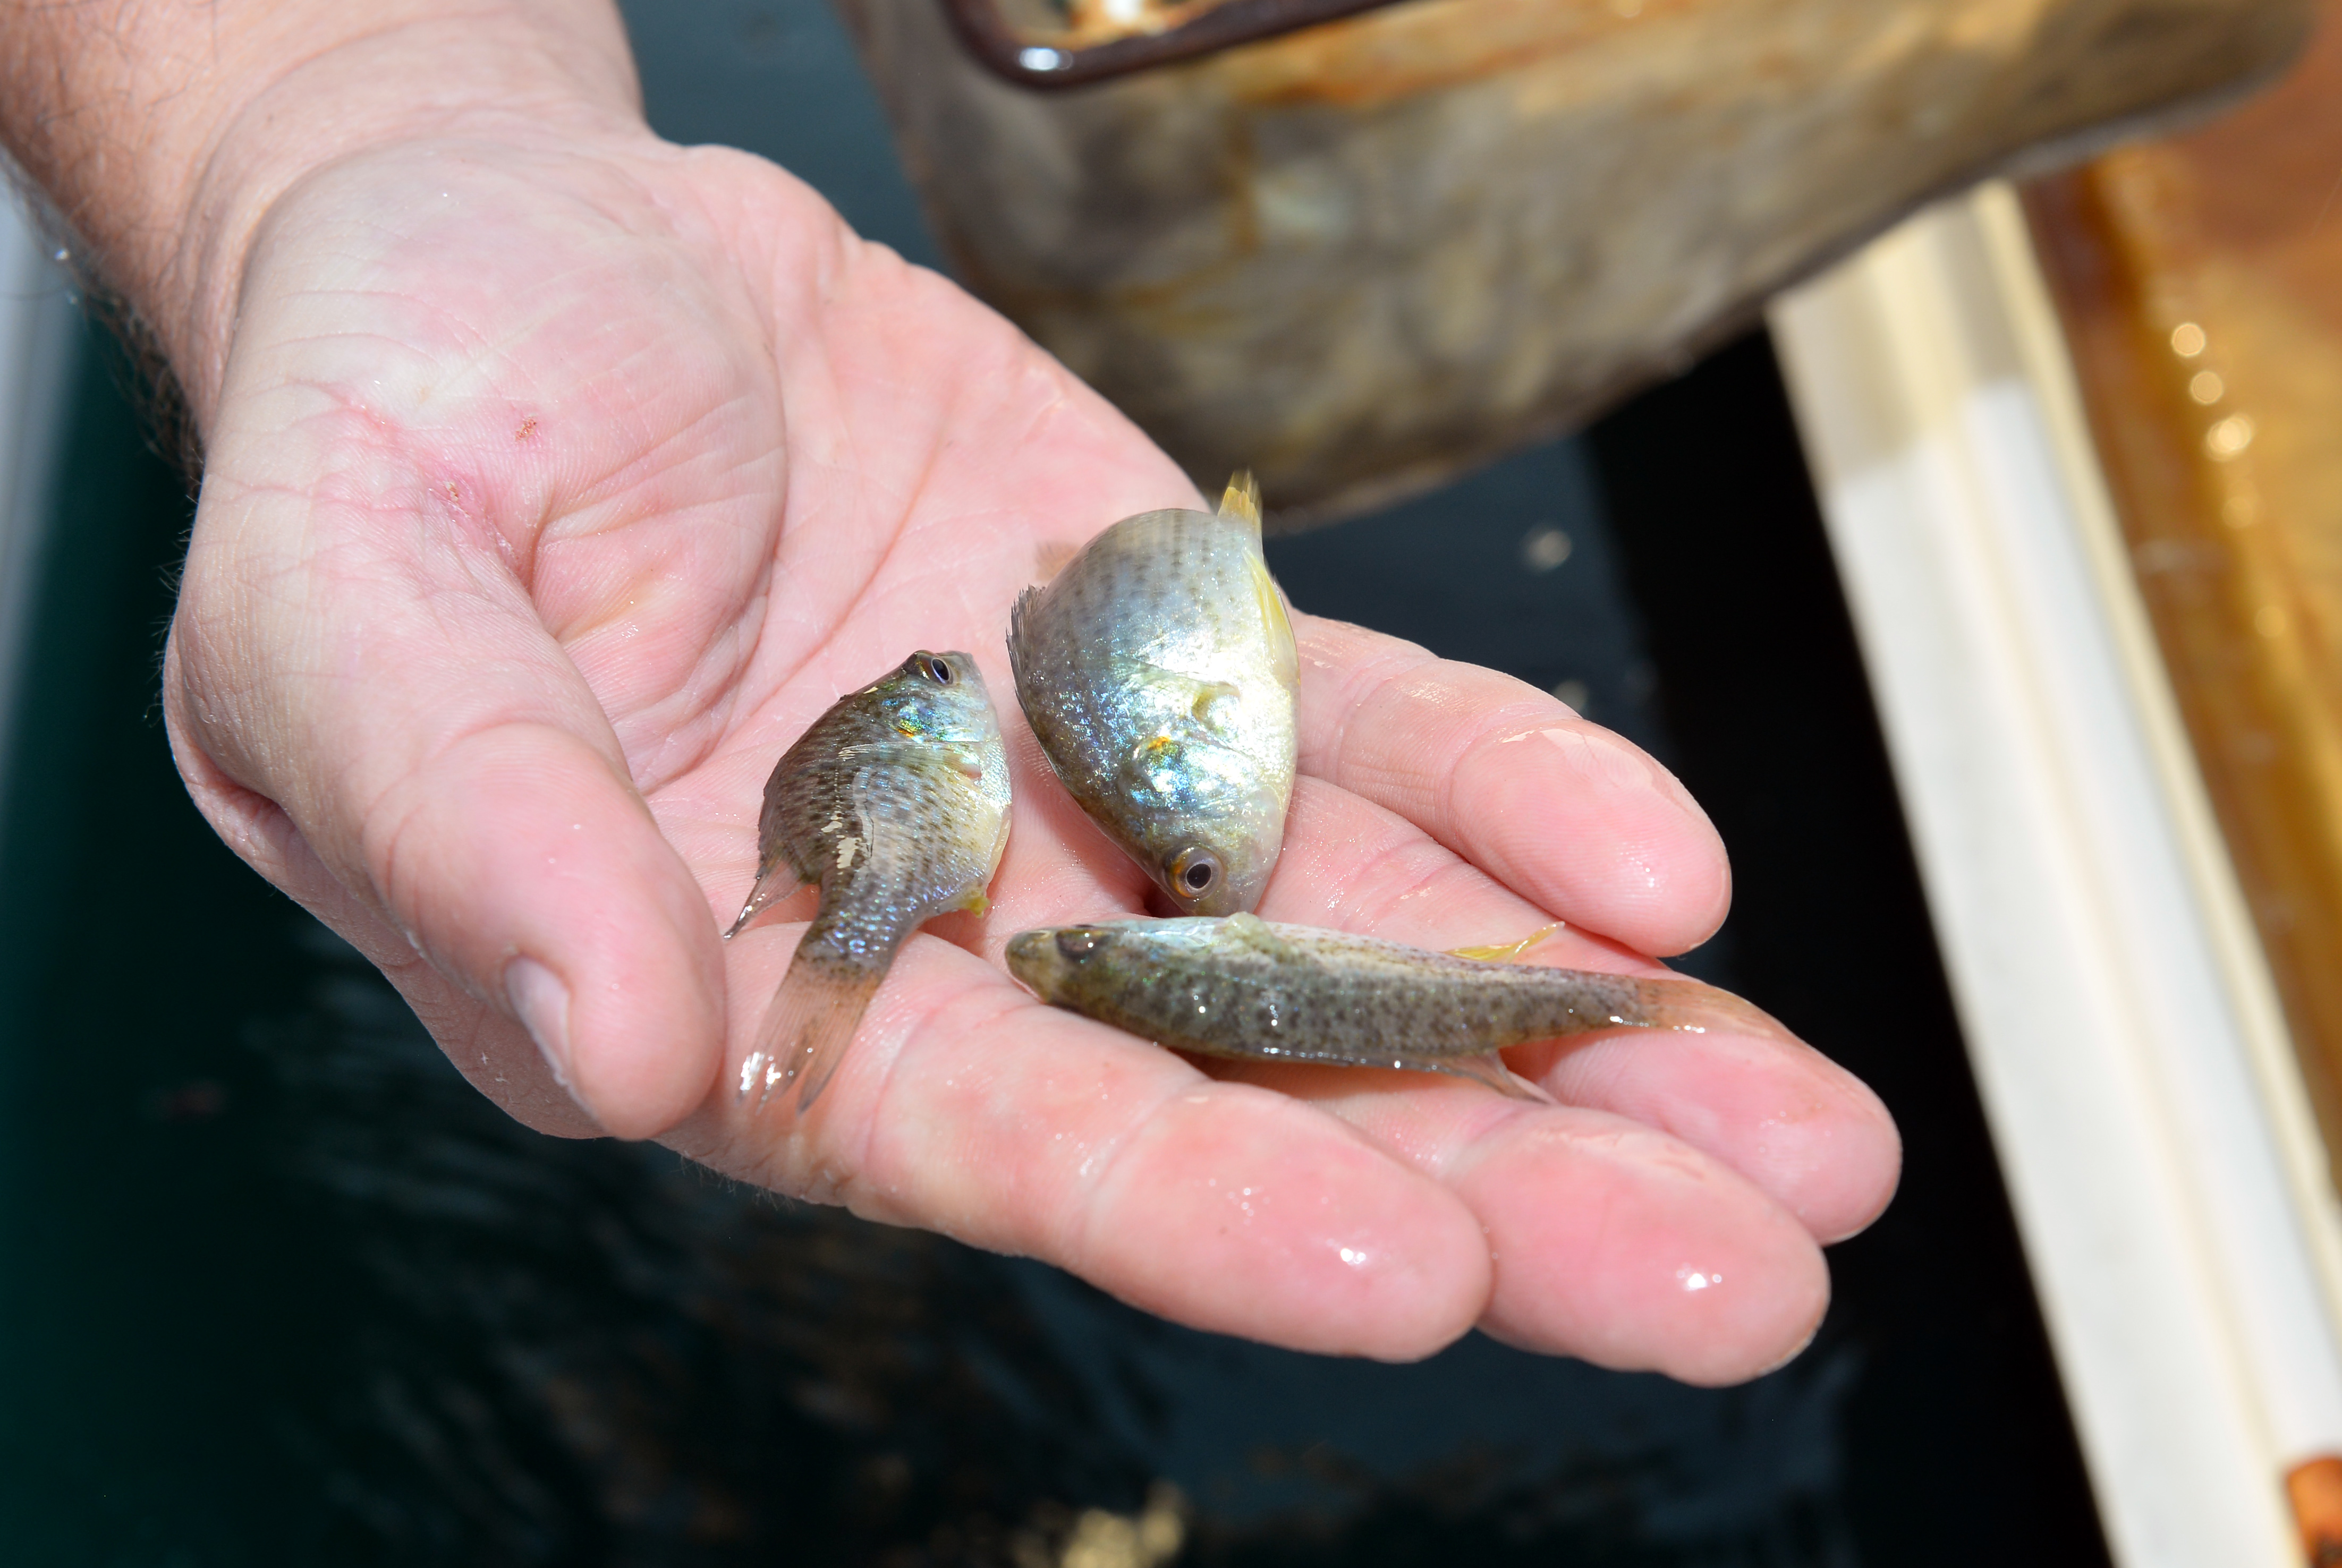 Base Lake stocked with 10,000 redear sunfish > Offutt Air Force